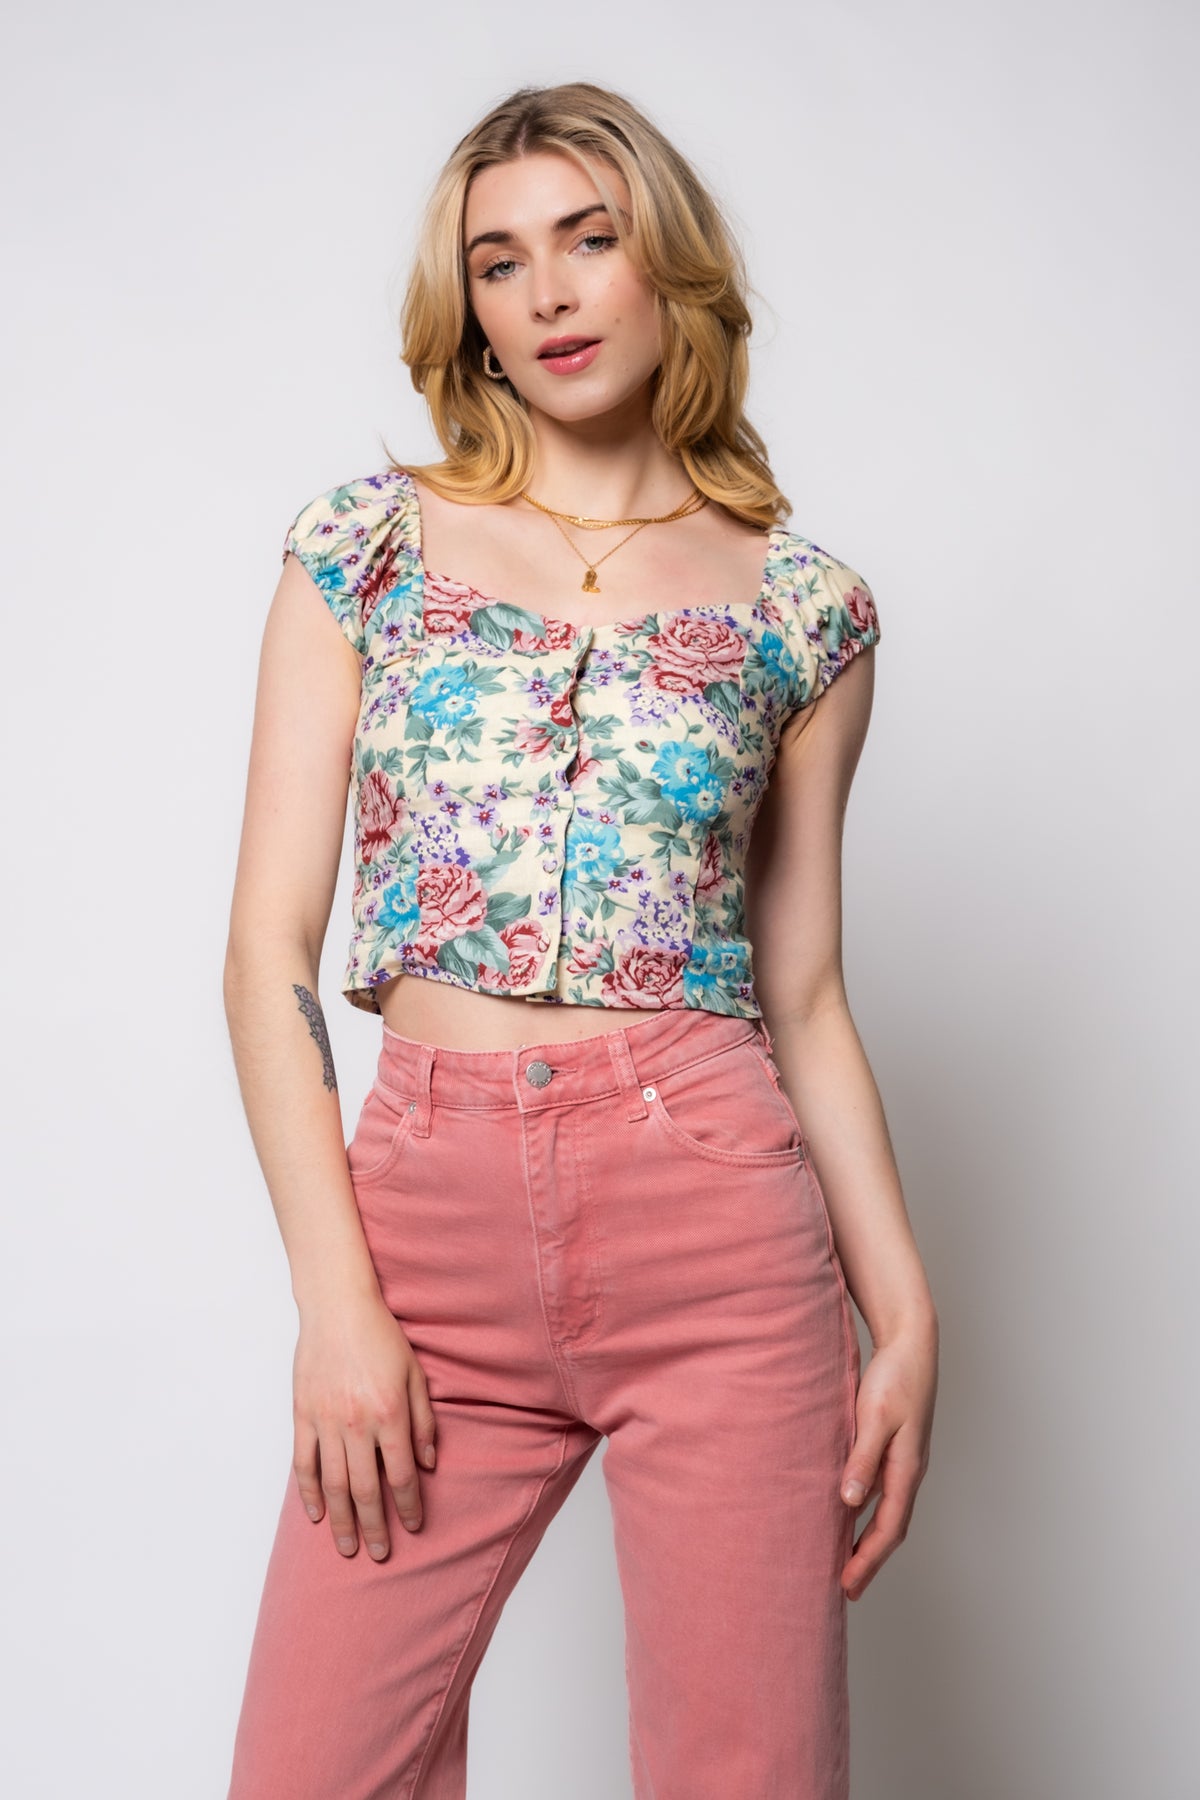 Rolla's Emmy Rosette Top